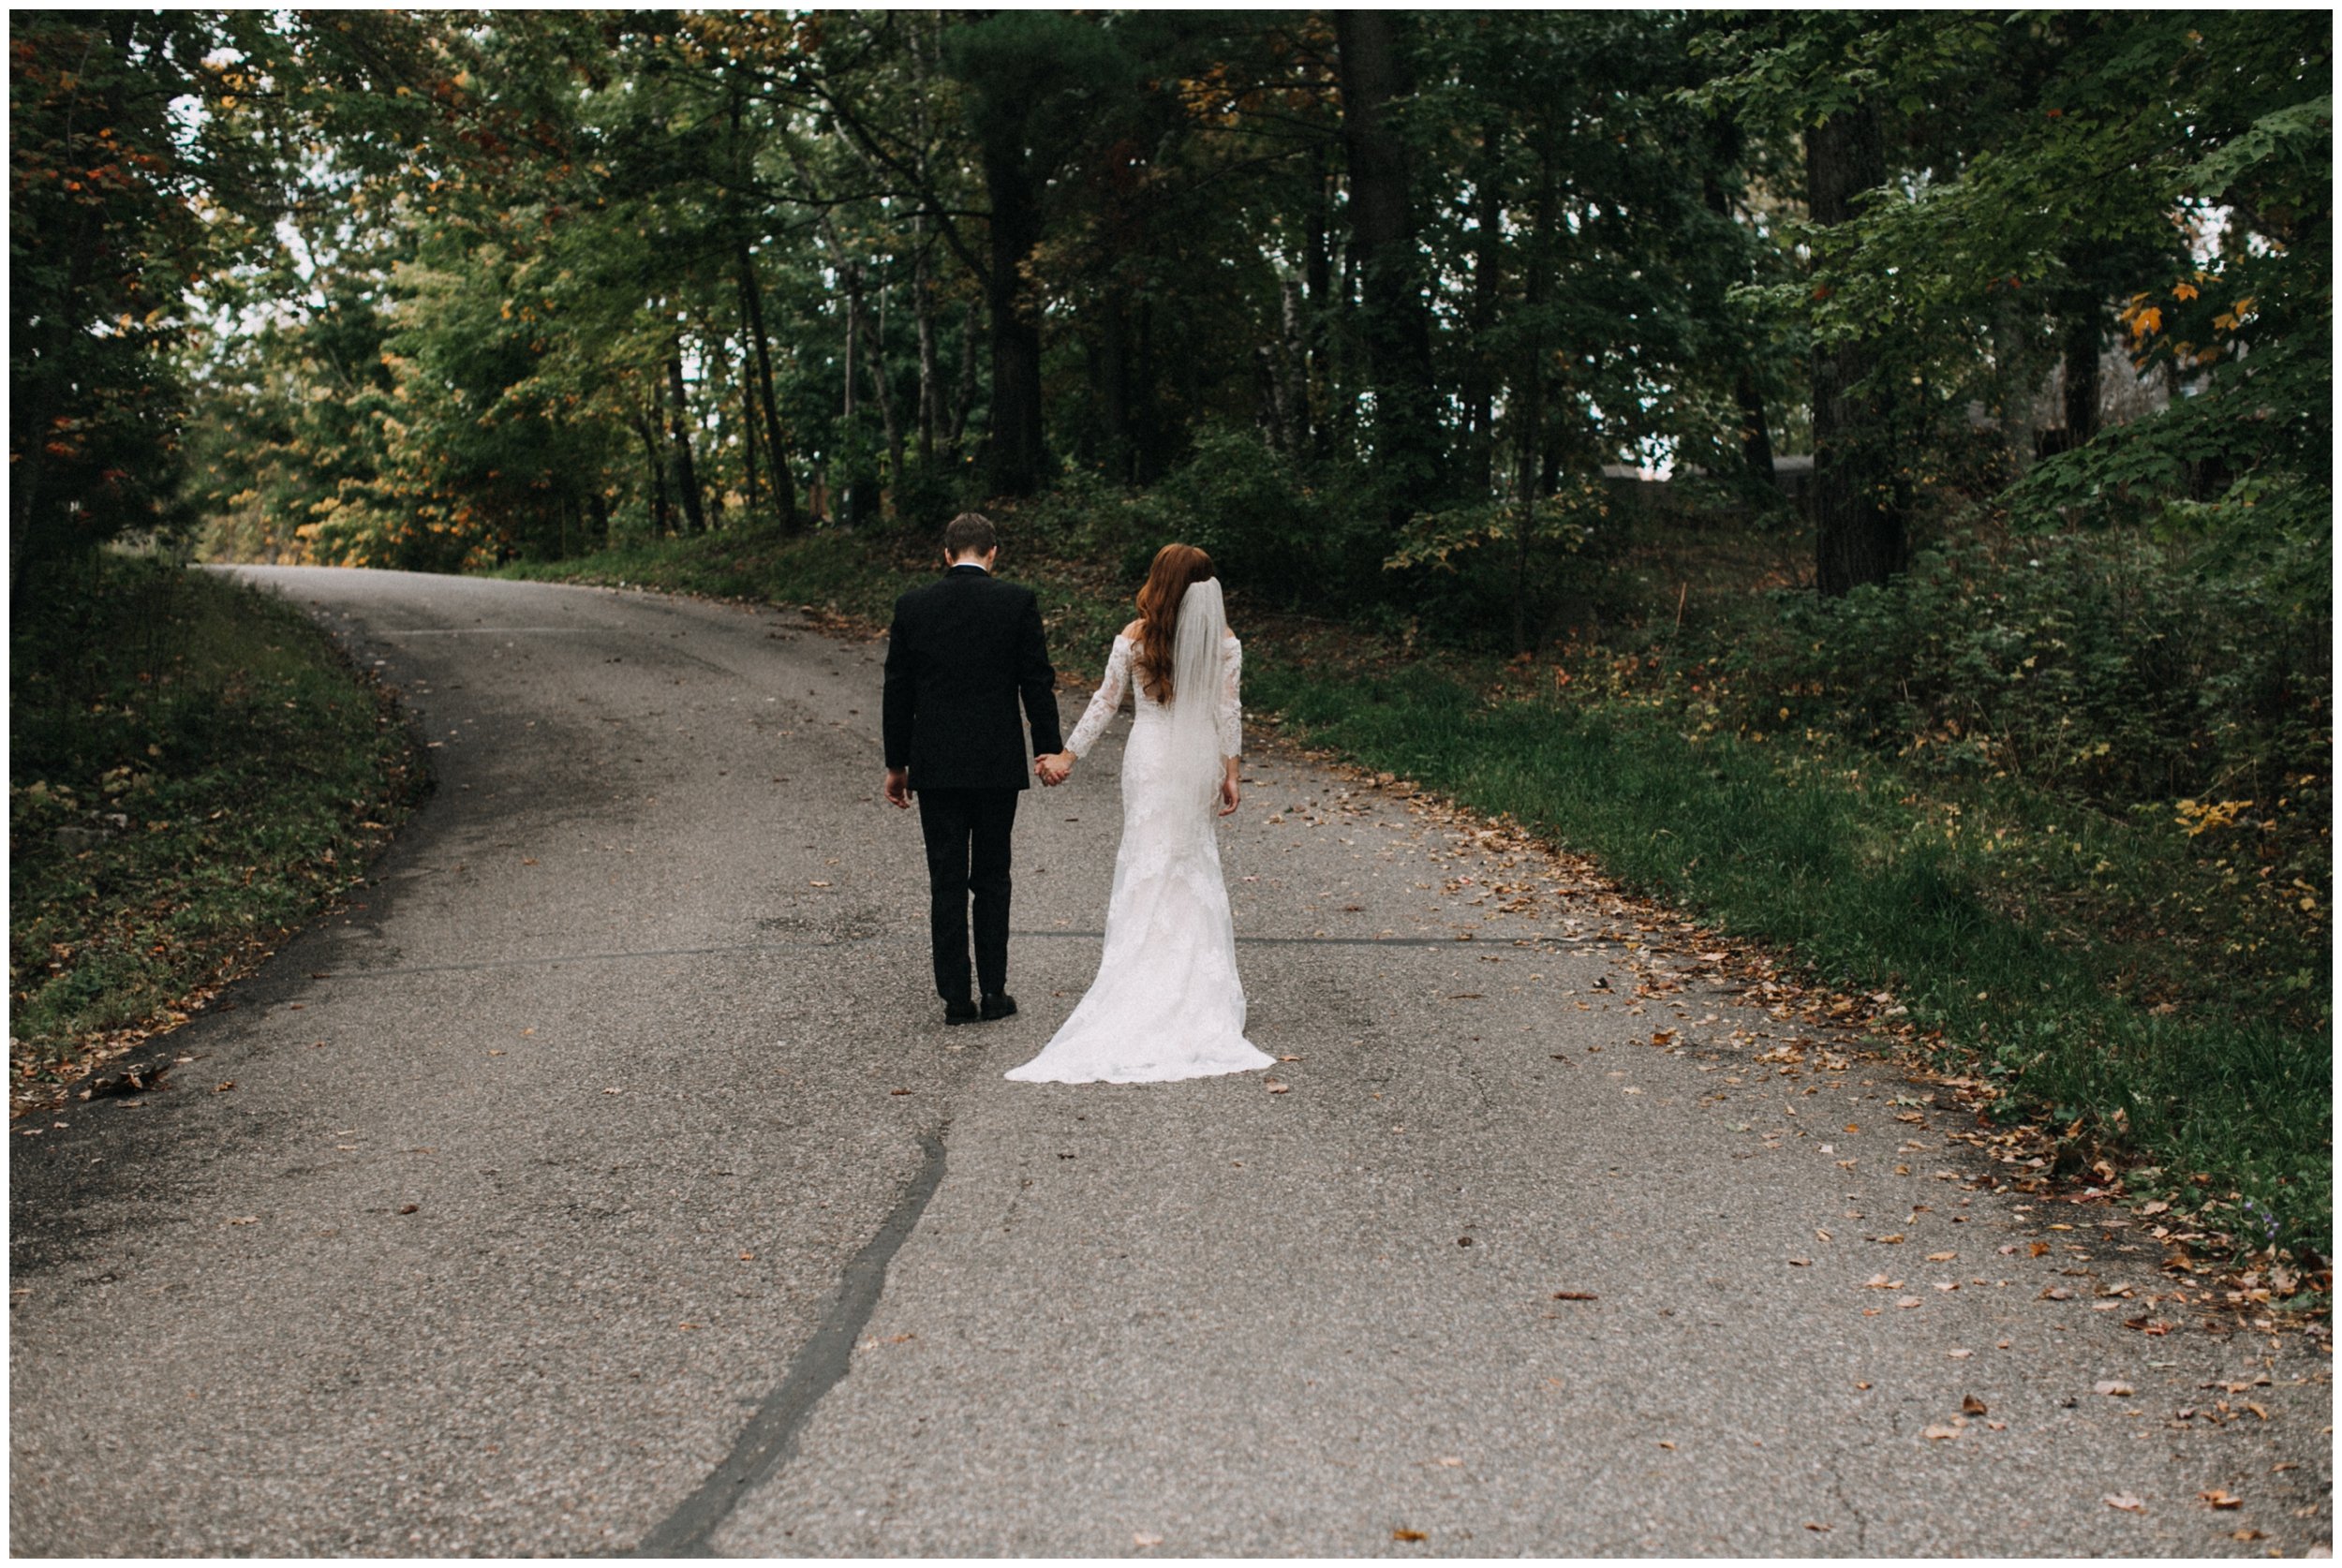 Bride and groom holding hands, walking on wooded road in Nisswa, Minnesota